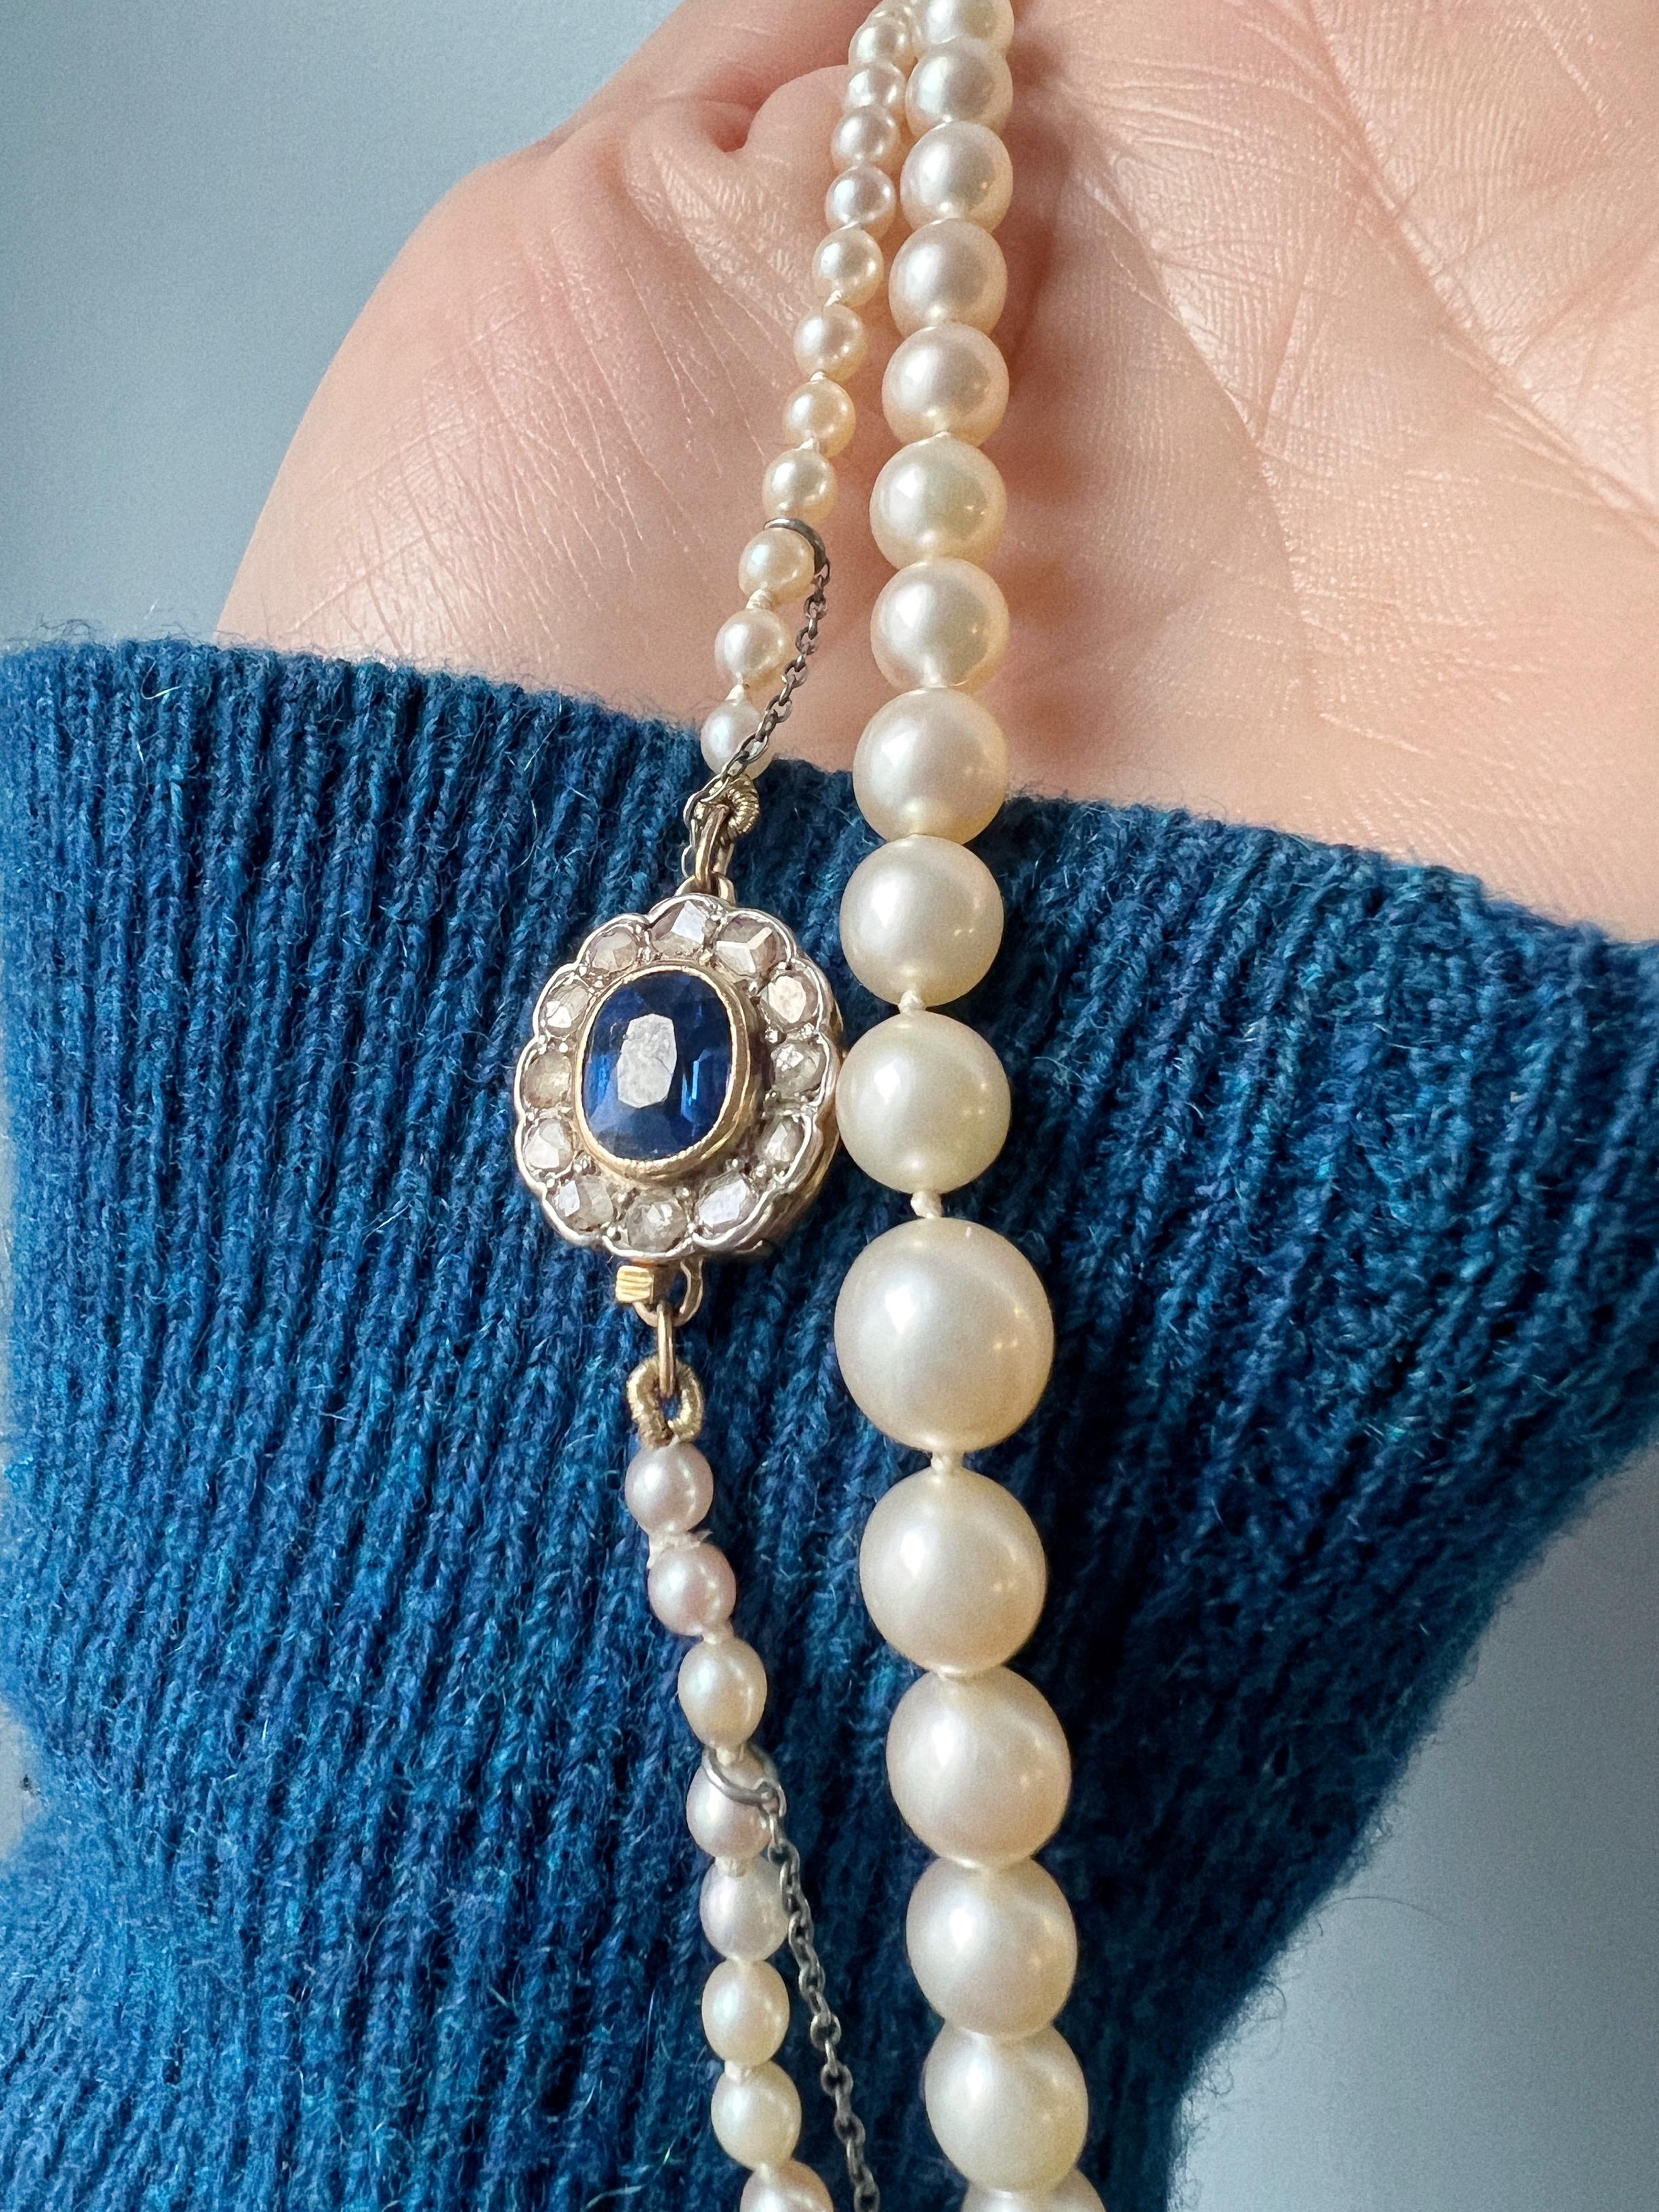 Women's or Men's Art Deco Era Akoya Pearl Necklace with 18k Diamond and Blue Sapphire Clasp